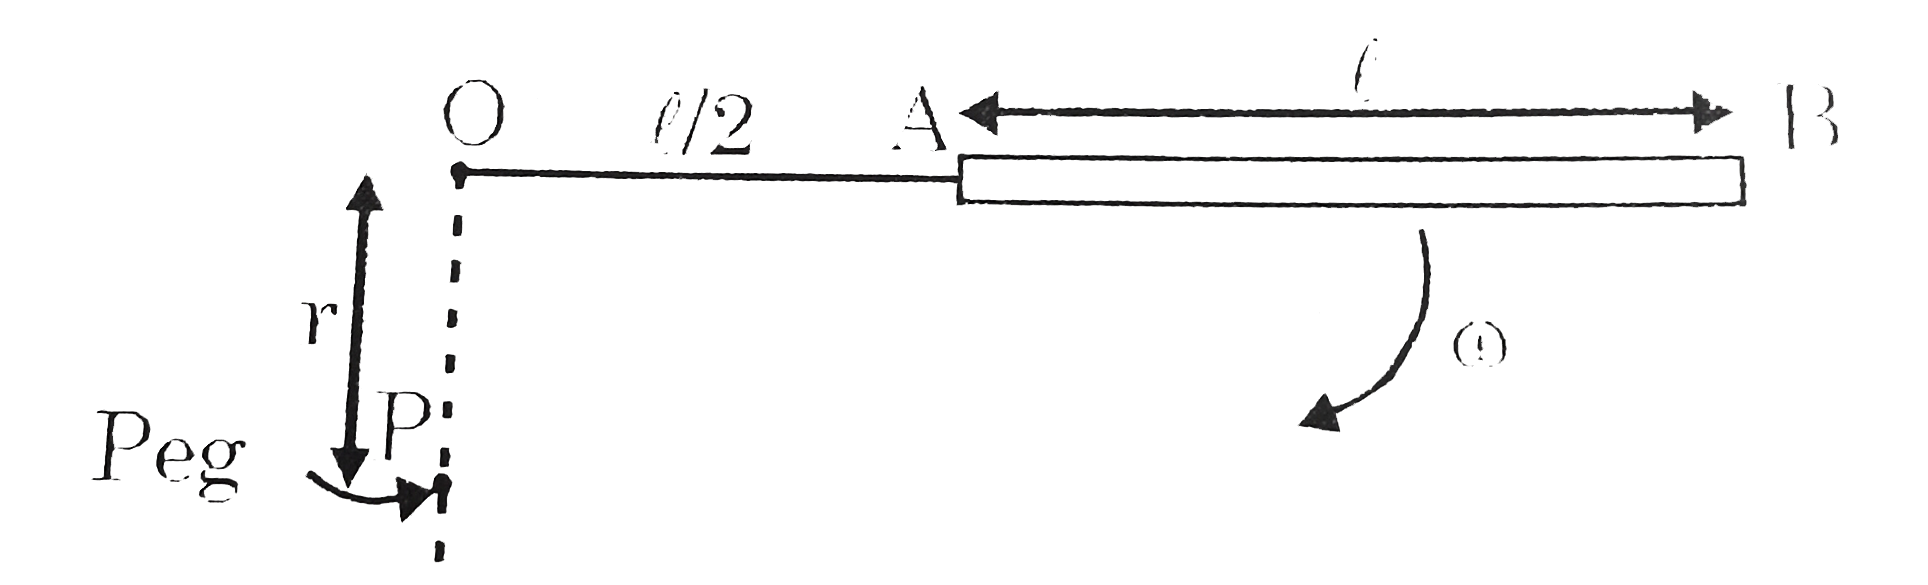 A  uniform thin rod AB of mass M and length l attached to a string OA of length (l)/(2) is placed on a smooth horizontal plane and rotates with angular velocity omega around a vertical axis through O. A peg P is inserted in the plane in order that on striking it the bar will come exactly to rest